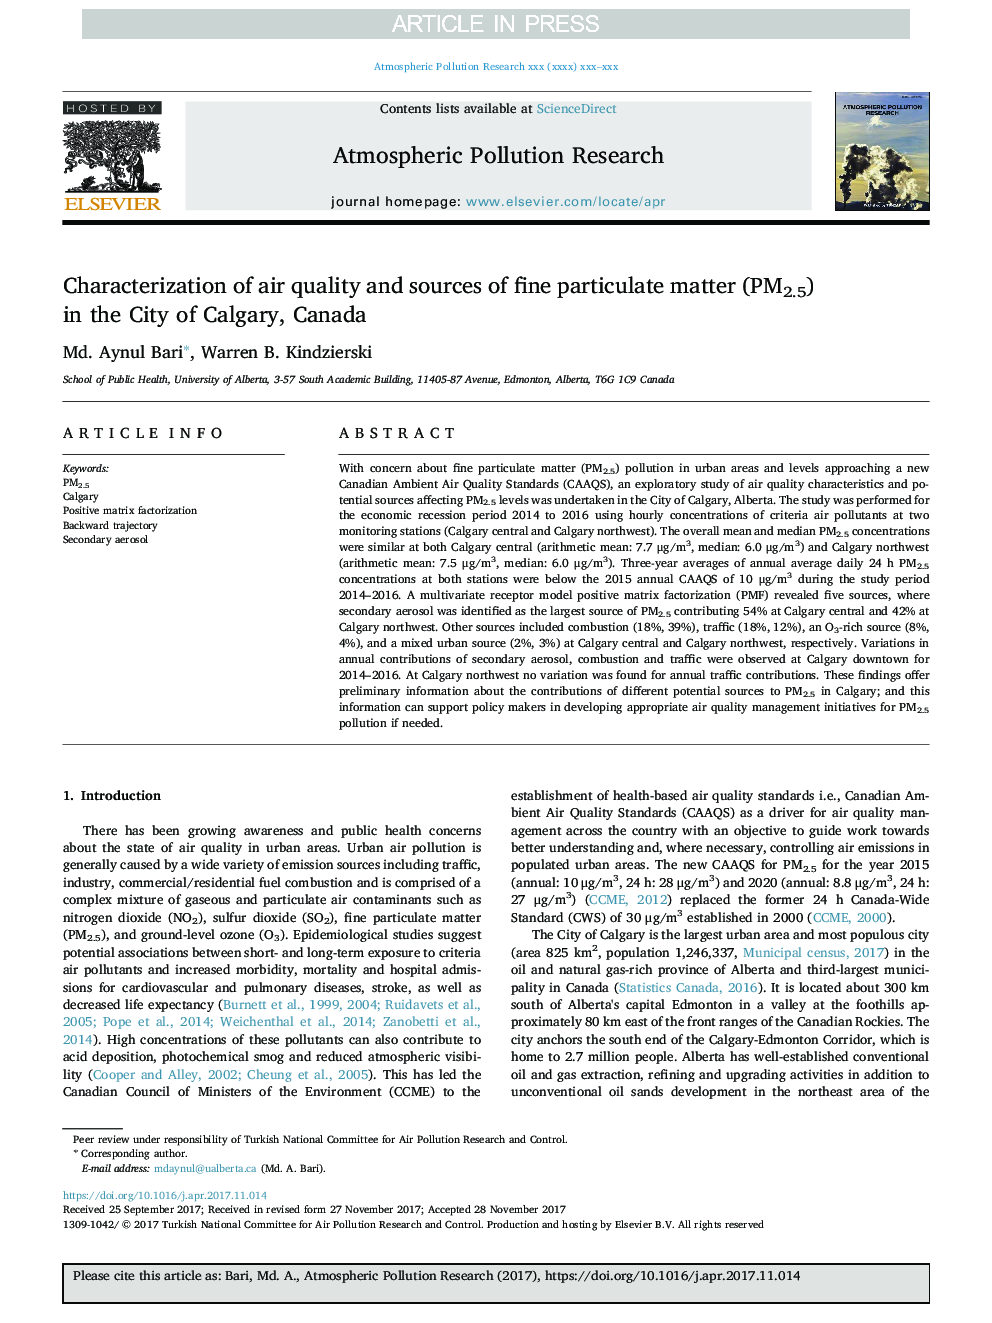 Characterization of air quality and sources of fine particulate matter (PM2.5) in the City of Calgary, Canada